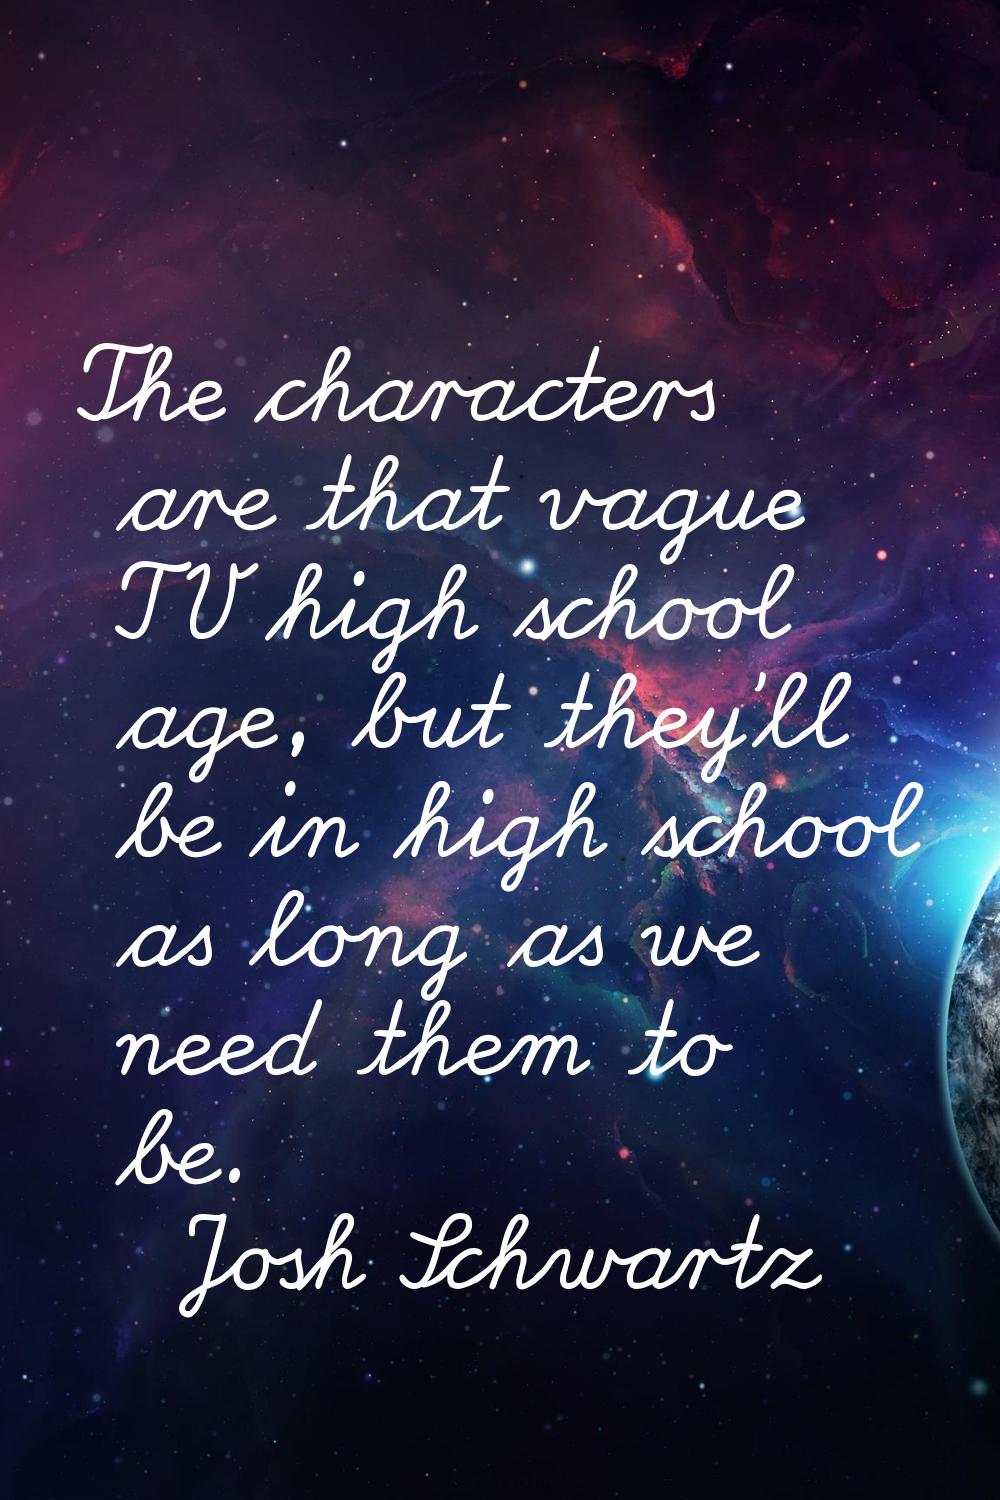 The characters are that vague TV high school age, but they'll be in high school as long as we need 